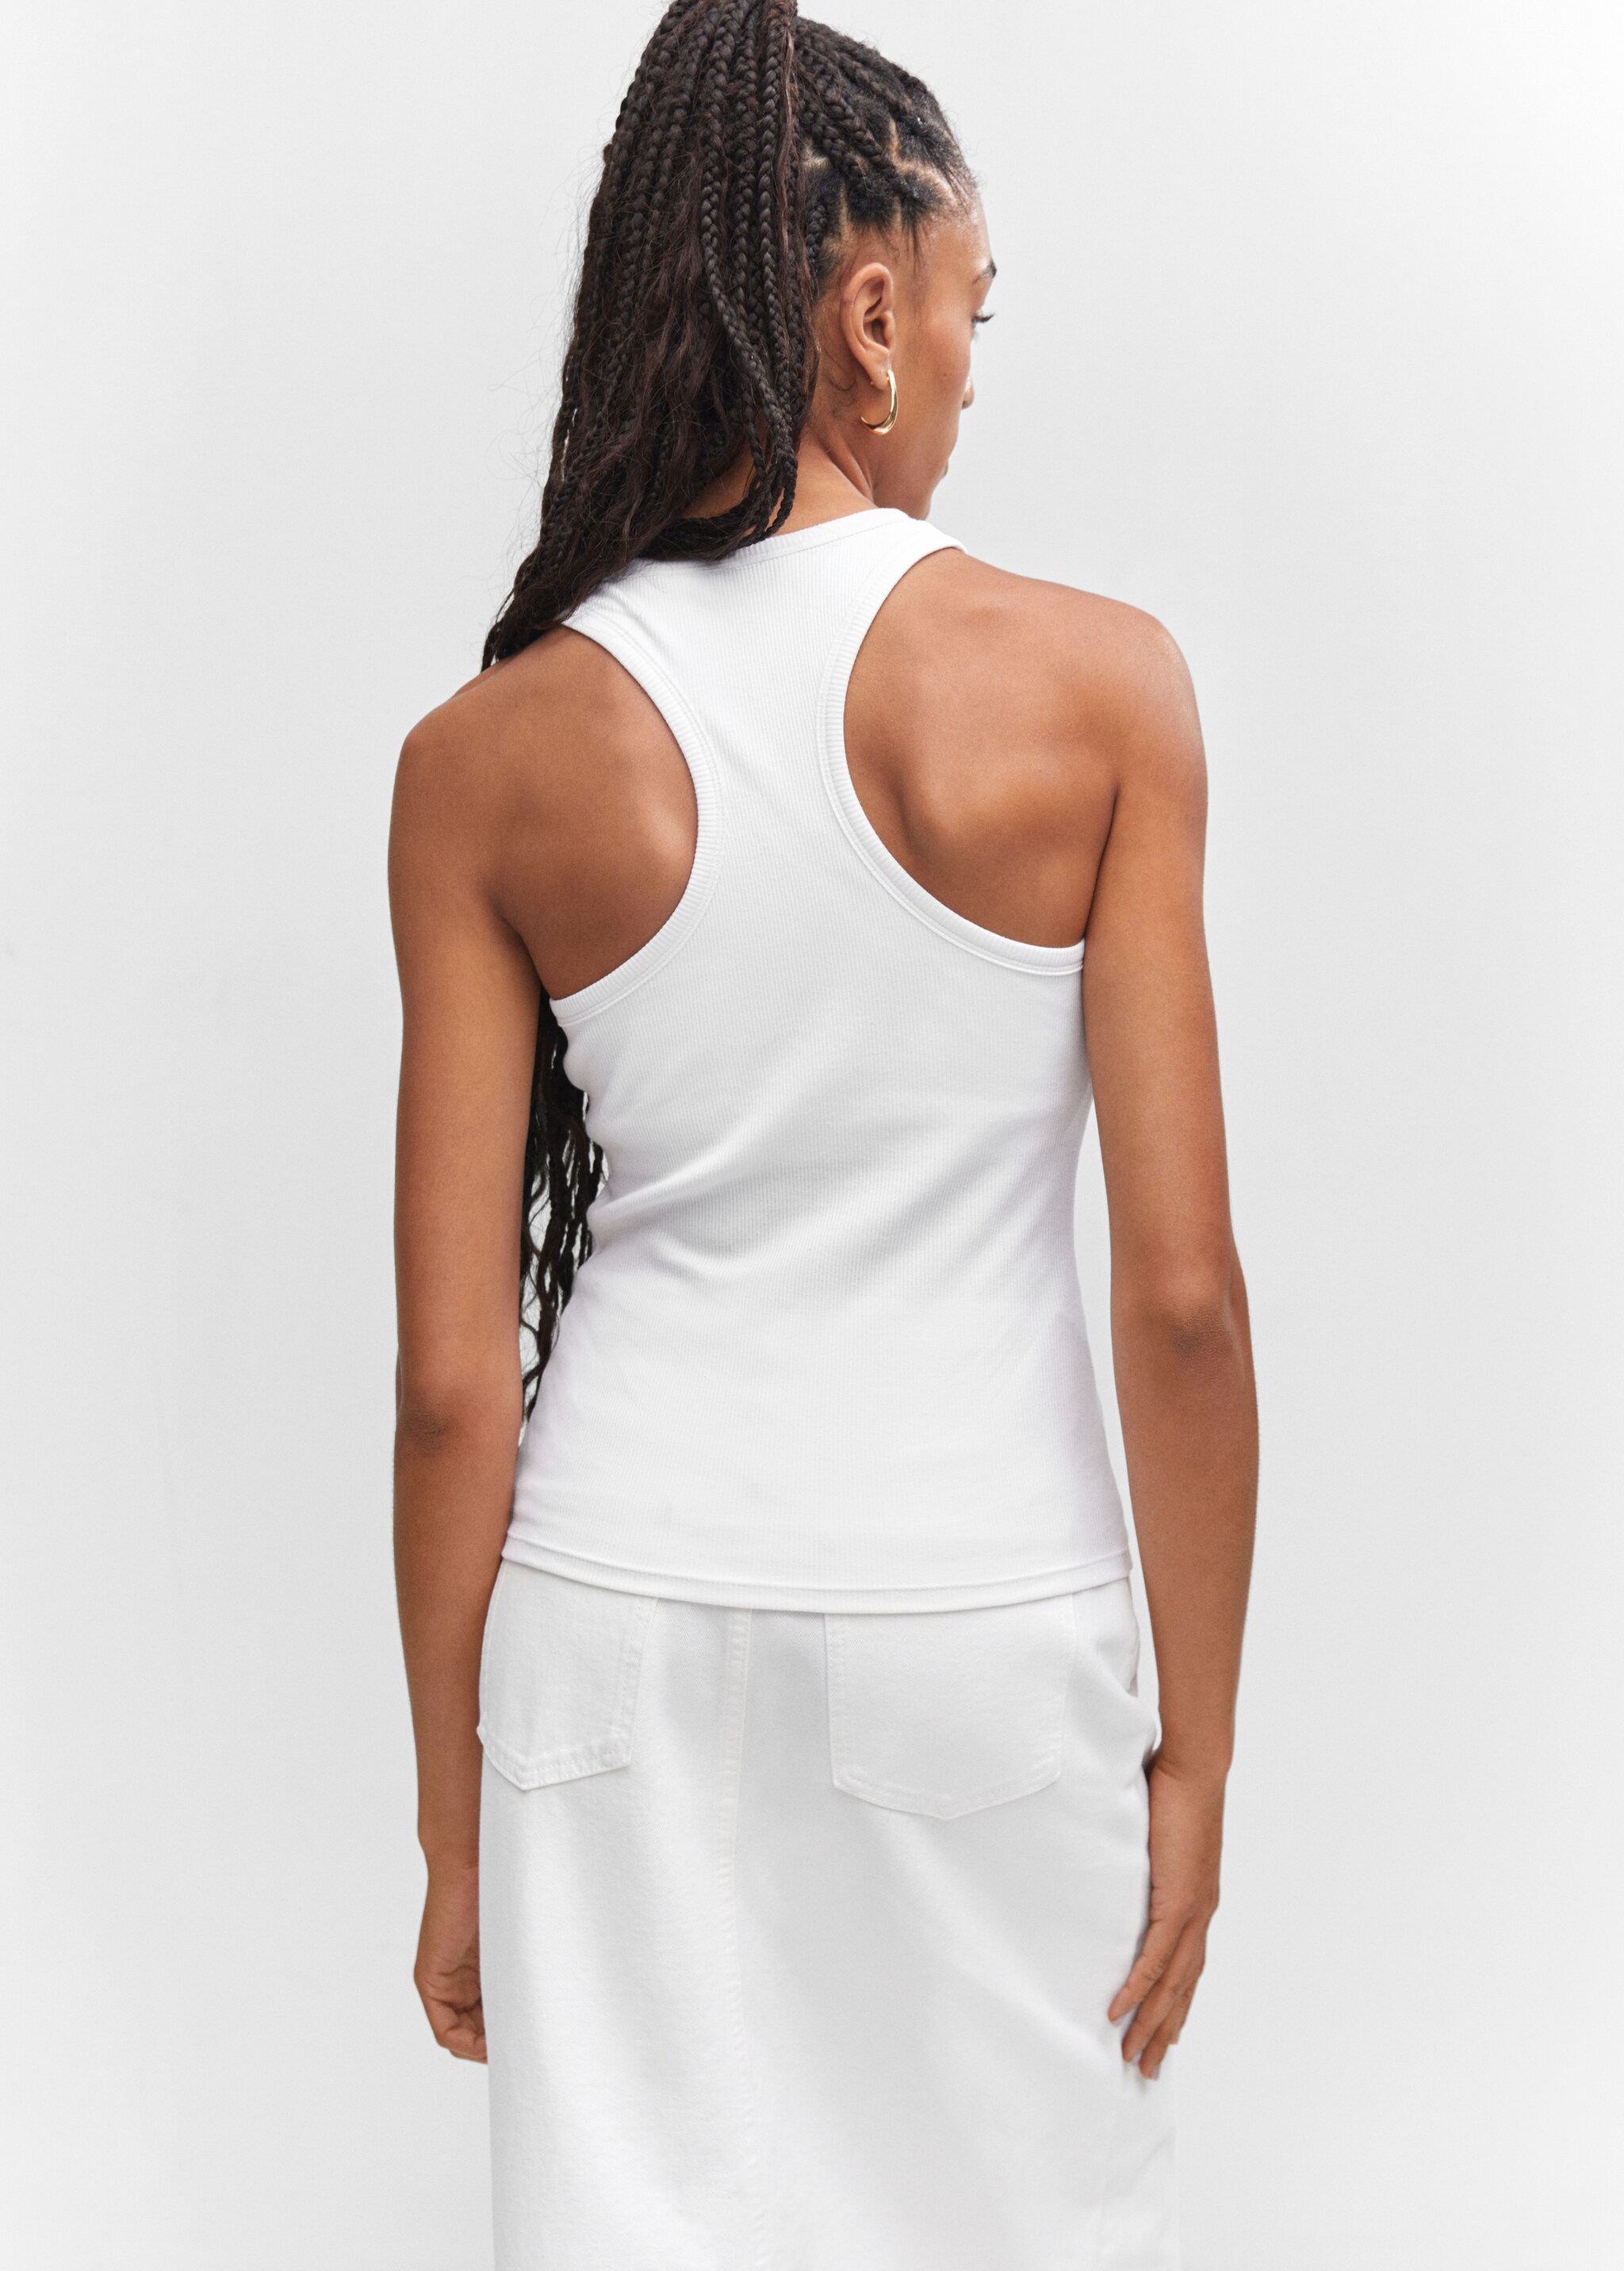 Halter top with low-cut back - Reverse of the article